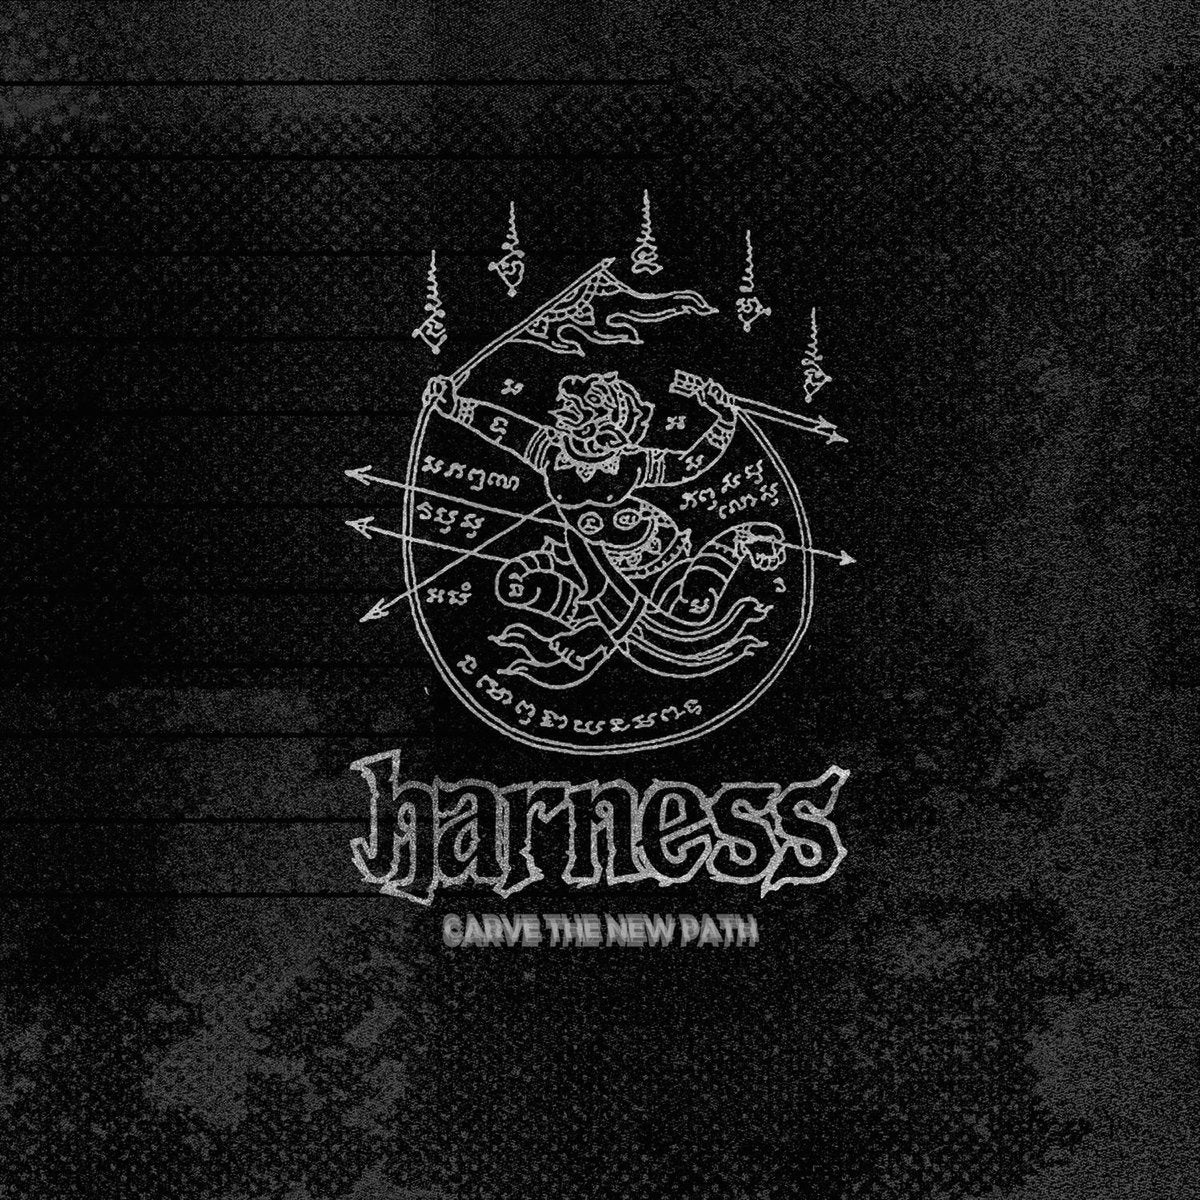 HARNESS "Carve The New Path" 7"